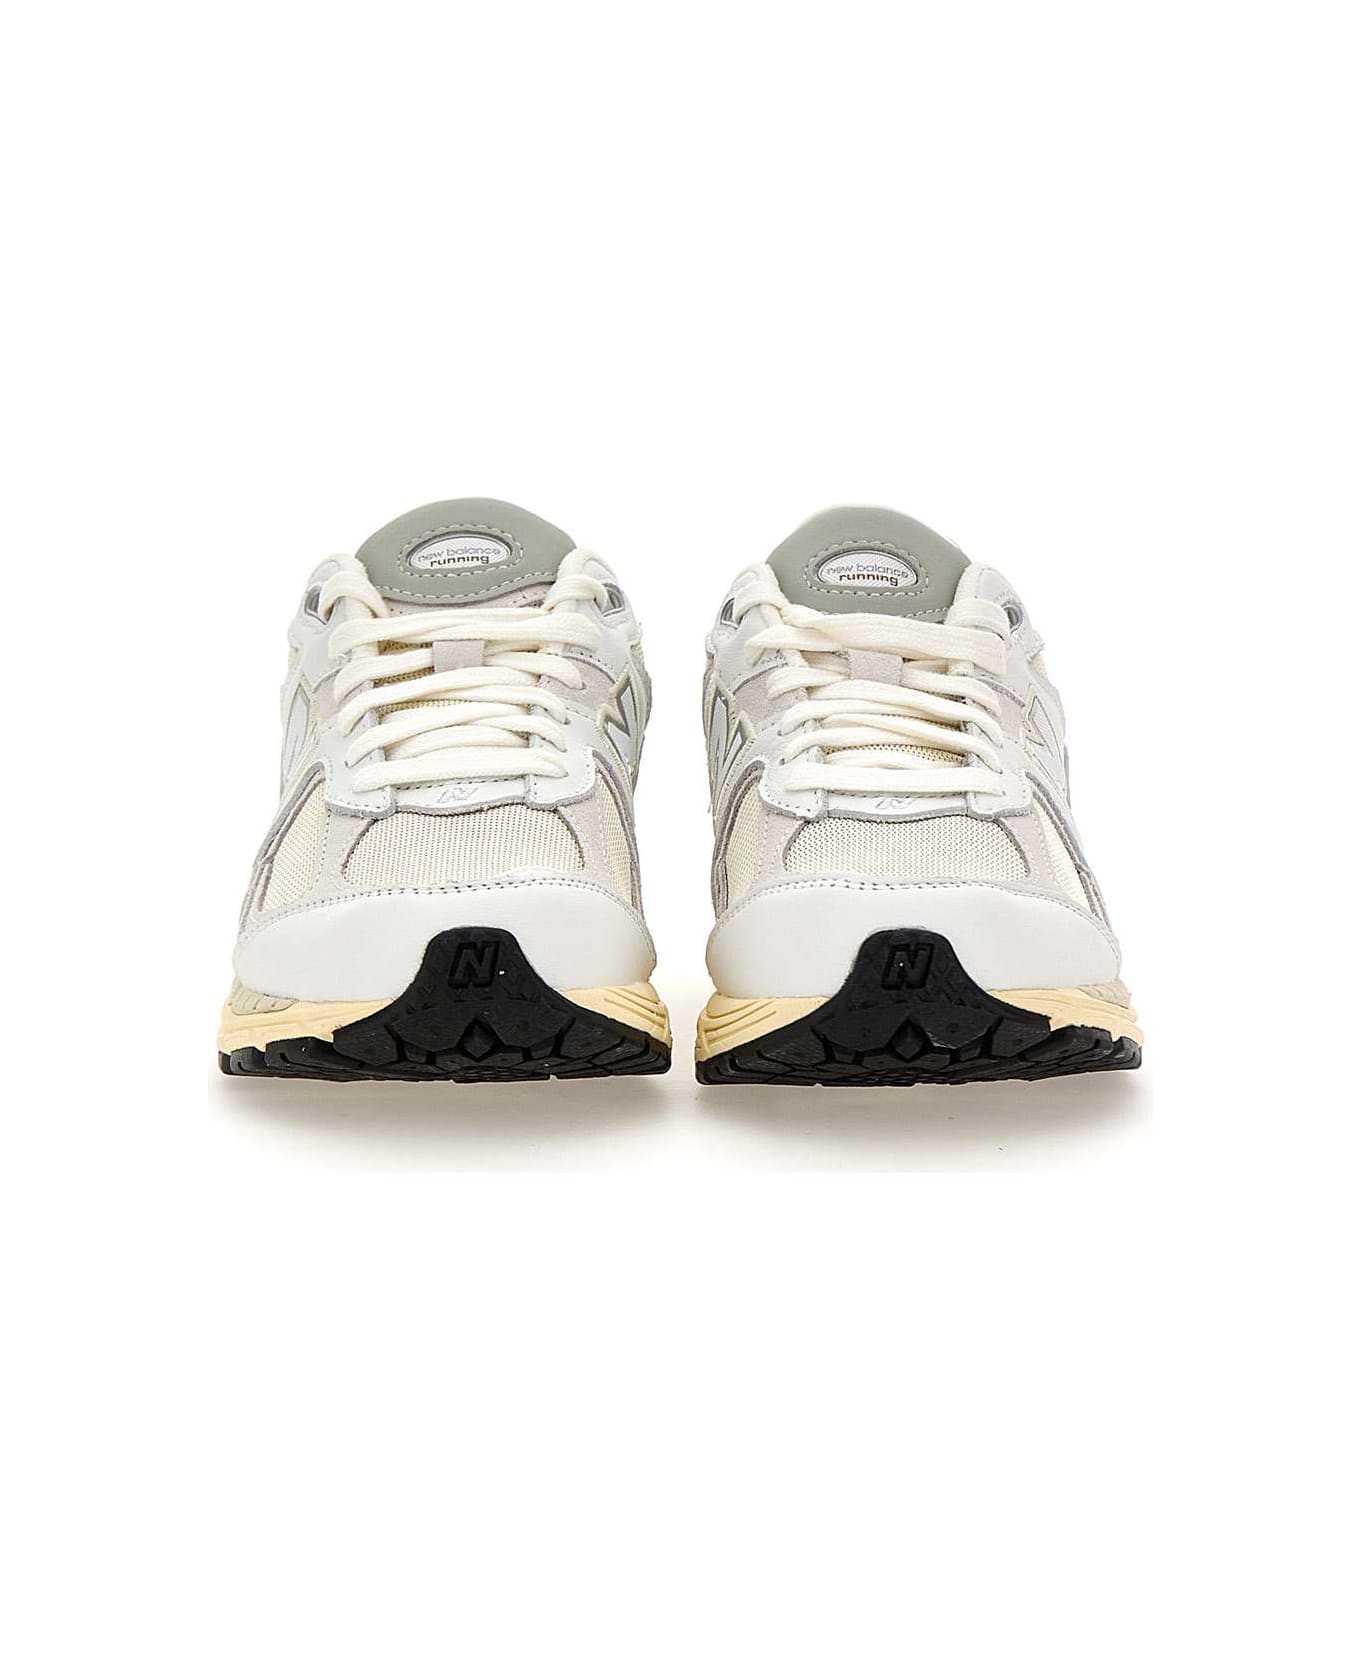 New Balance "2002" Sneakers - WHITE